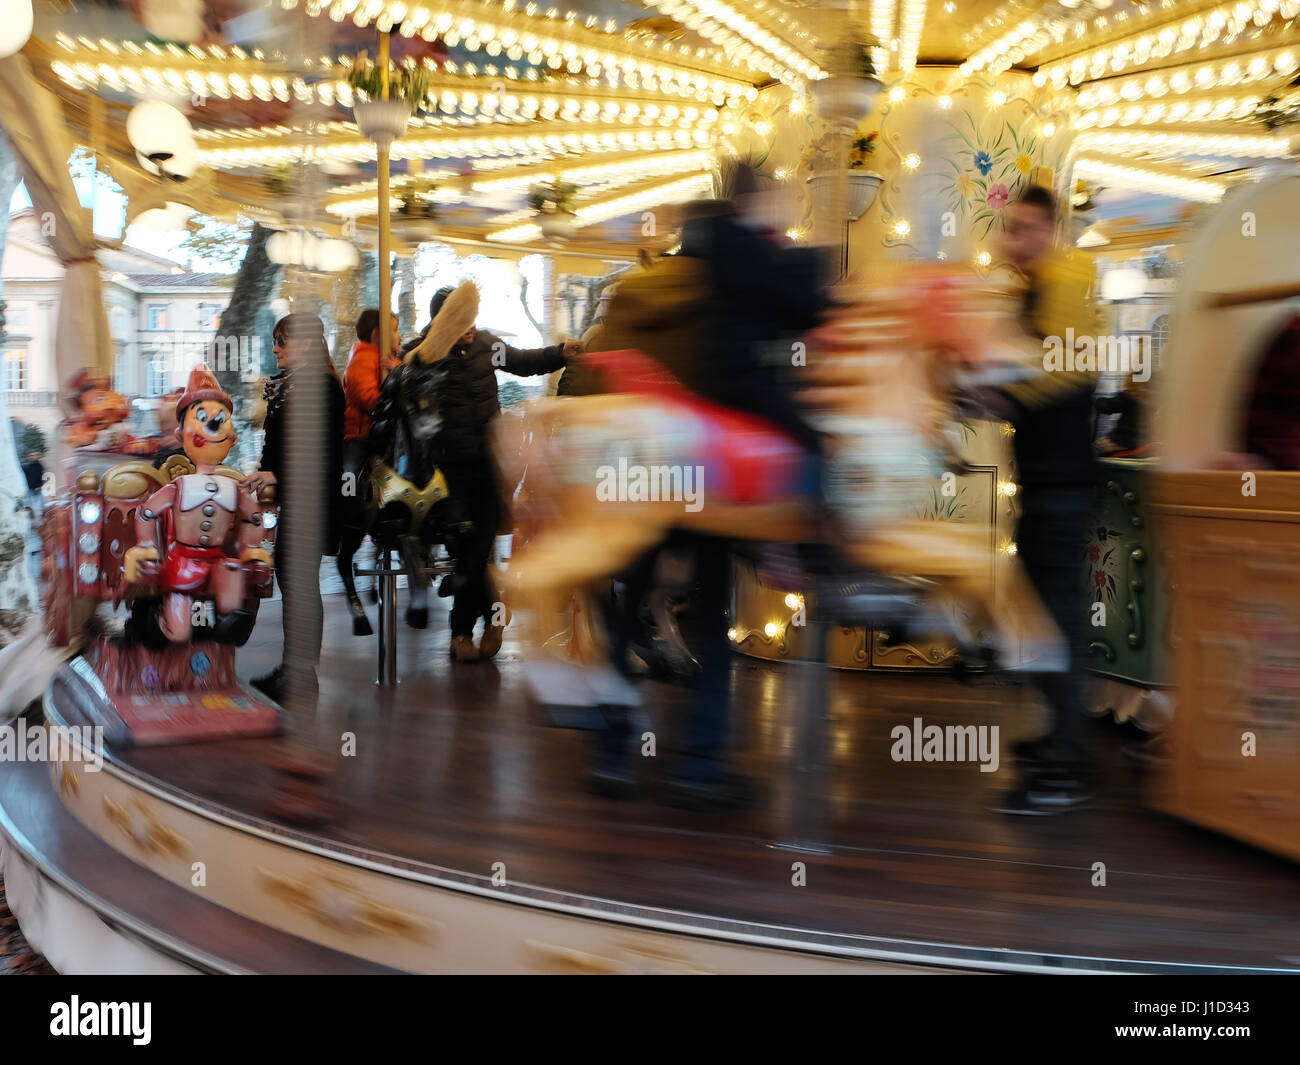 Moving Carousel - Pinocchio - Merry-go-round spinning around, woman wearing sunglasses freezed in colorful background - Lucca, Tuscany, Italy, Europe Stock Photo